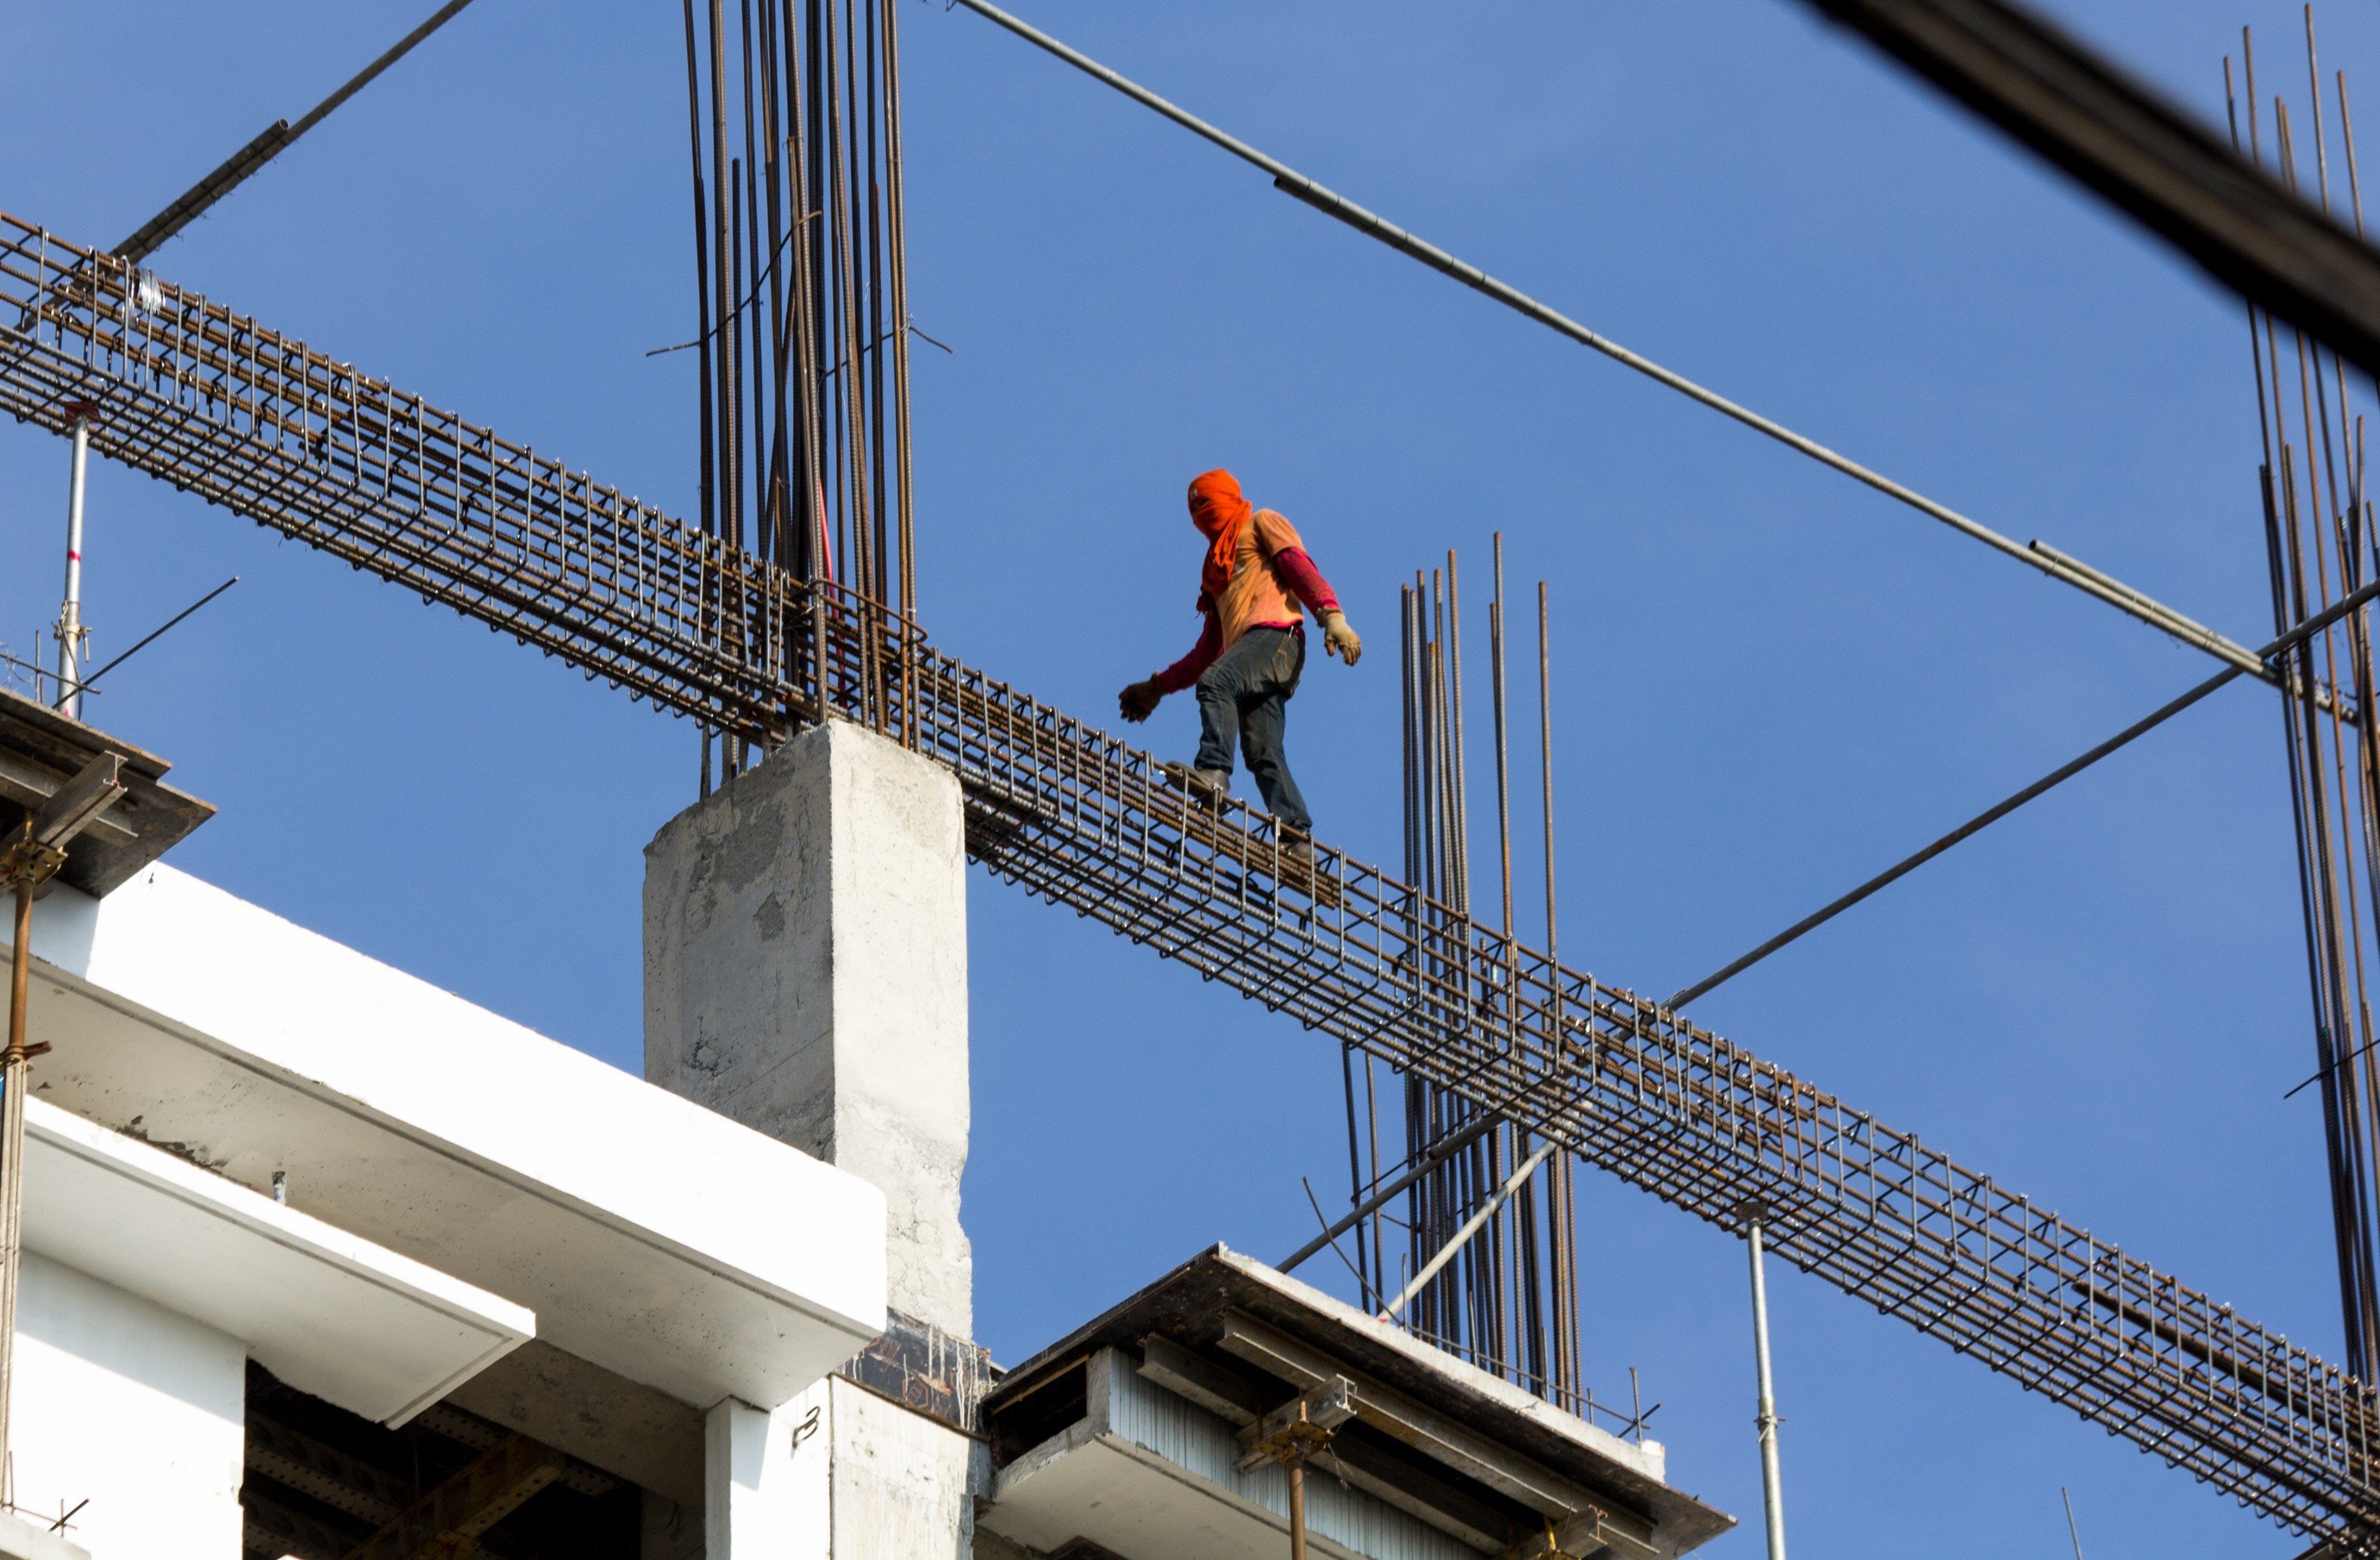 A worker fearlessly walks along steel reinforcement bars at a construction site in Manila. Photo: Getty Images/iStockphoto